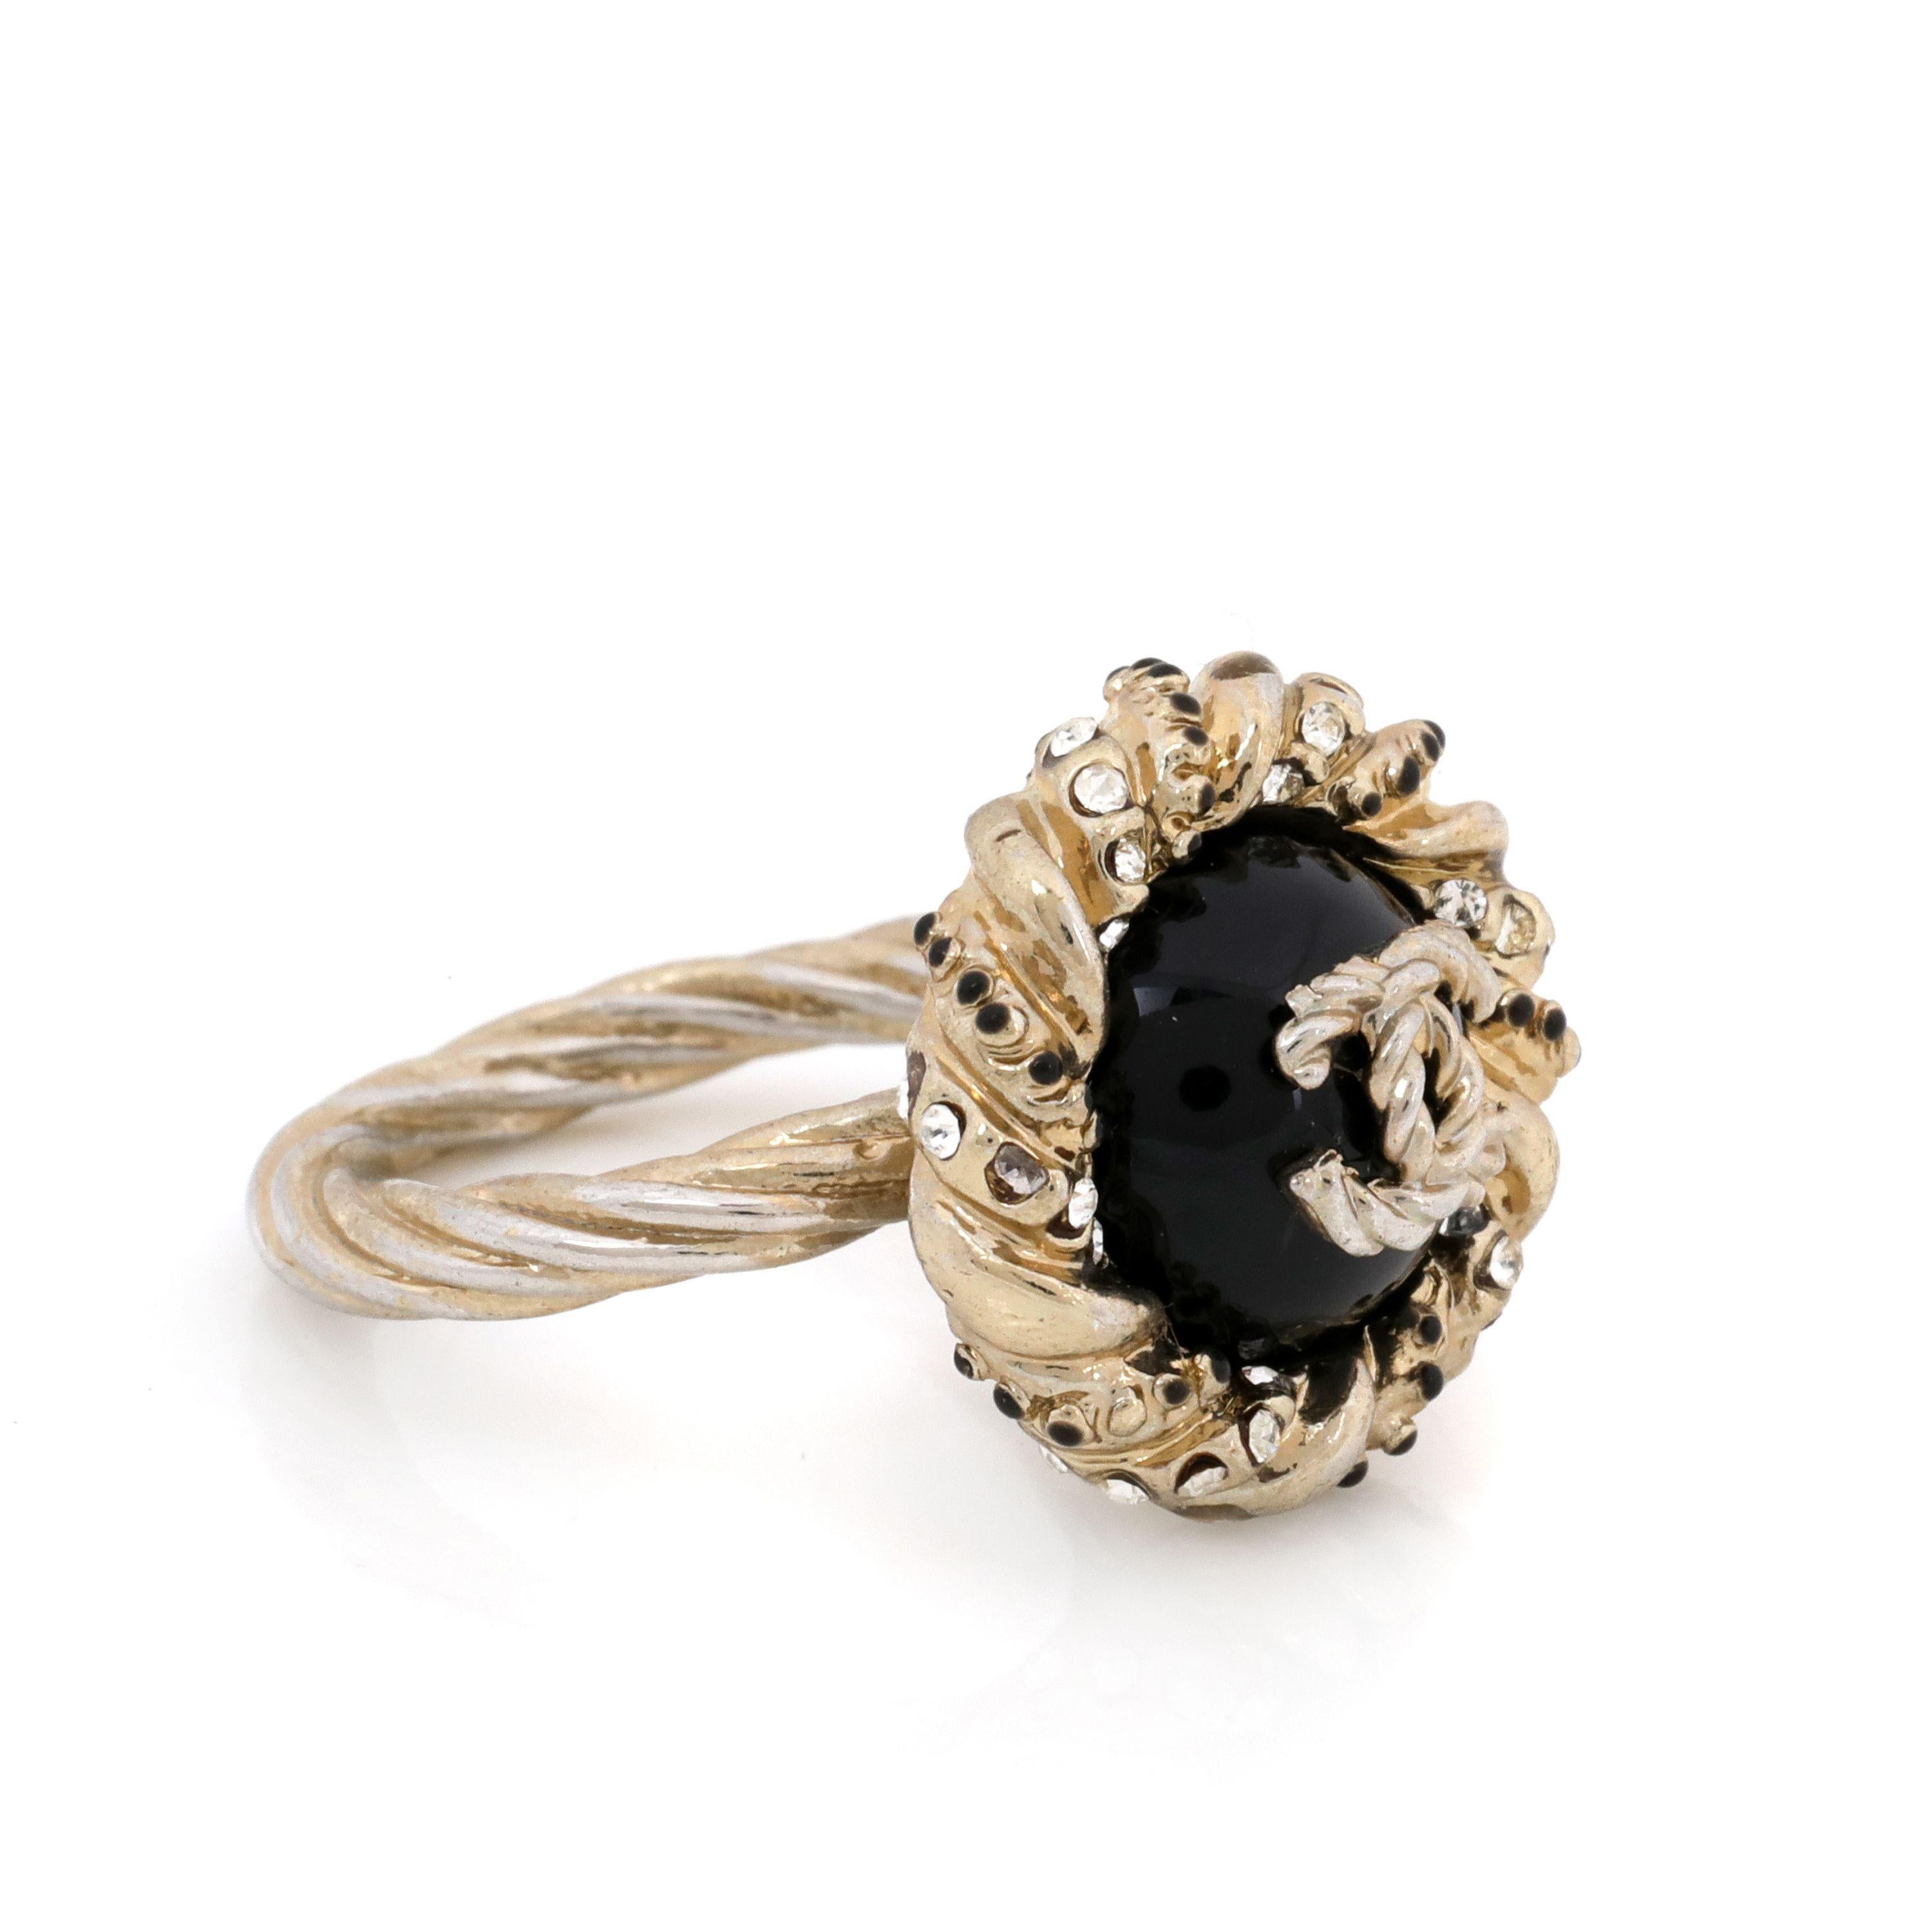 This authentic. Chanel Black Enamel Ring with CC Center is in excellent condition.  Black enamel, crystal embellishments with a worn gold finish.  Size 7.  Pouch or box included. 

PBF 14022
